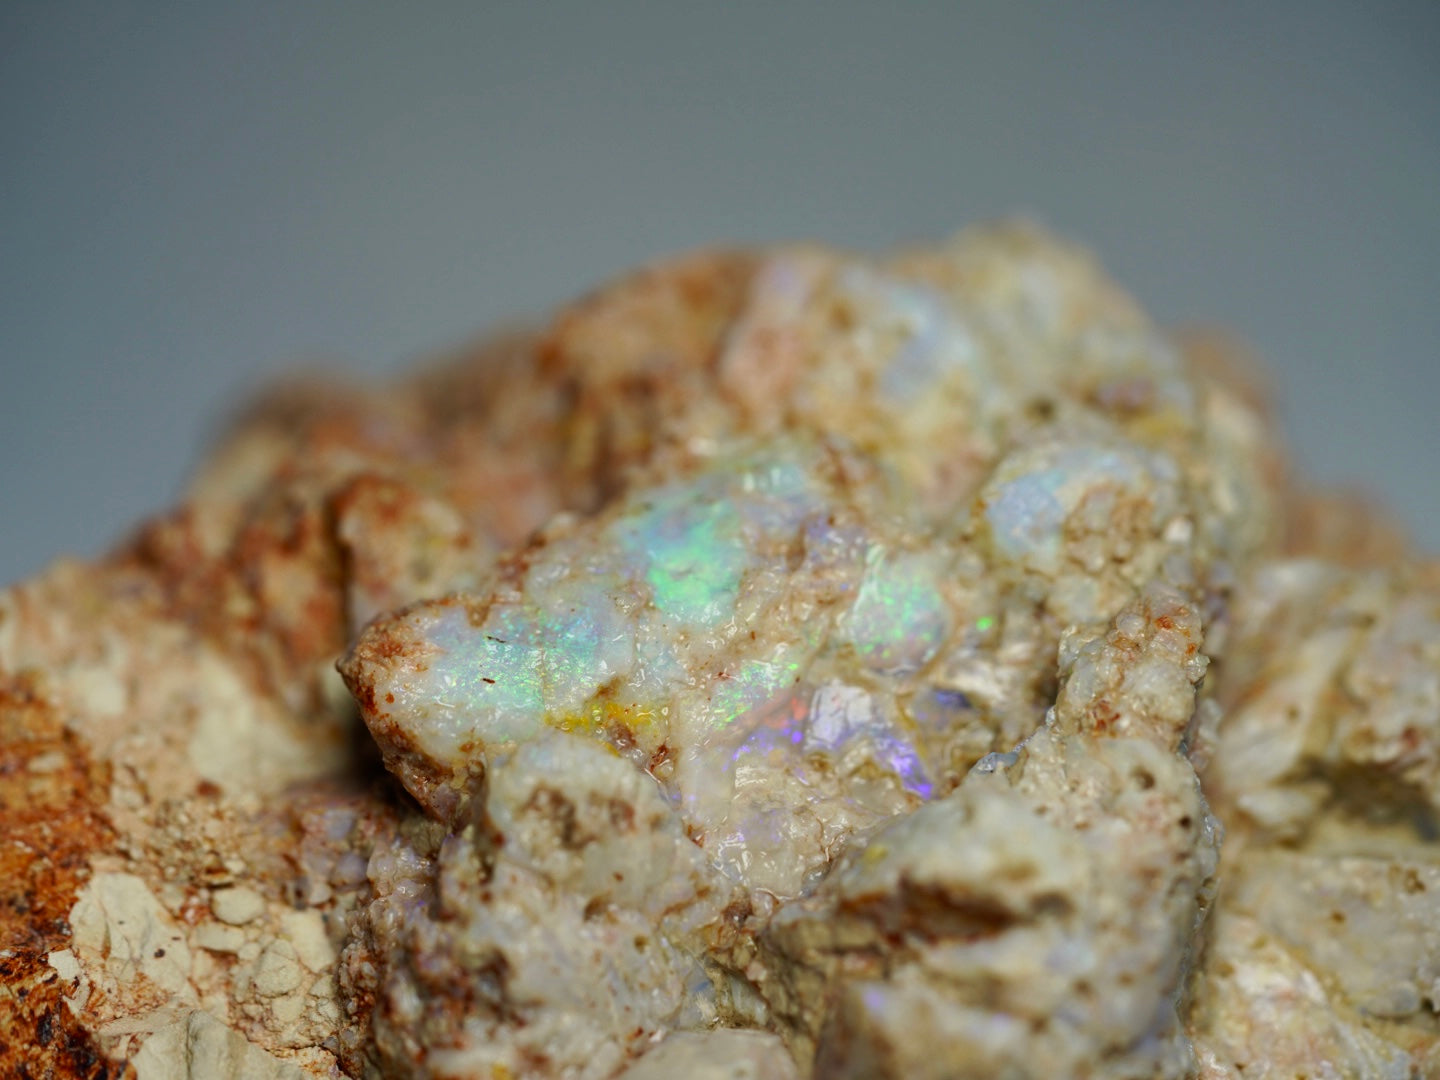 'The Comet' - Opal Pineapple